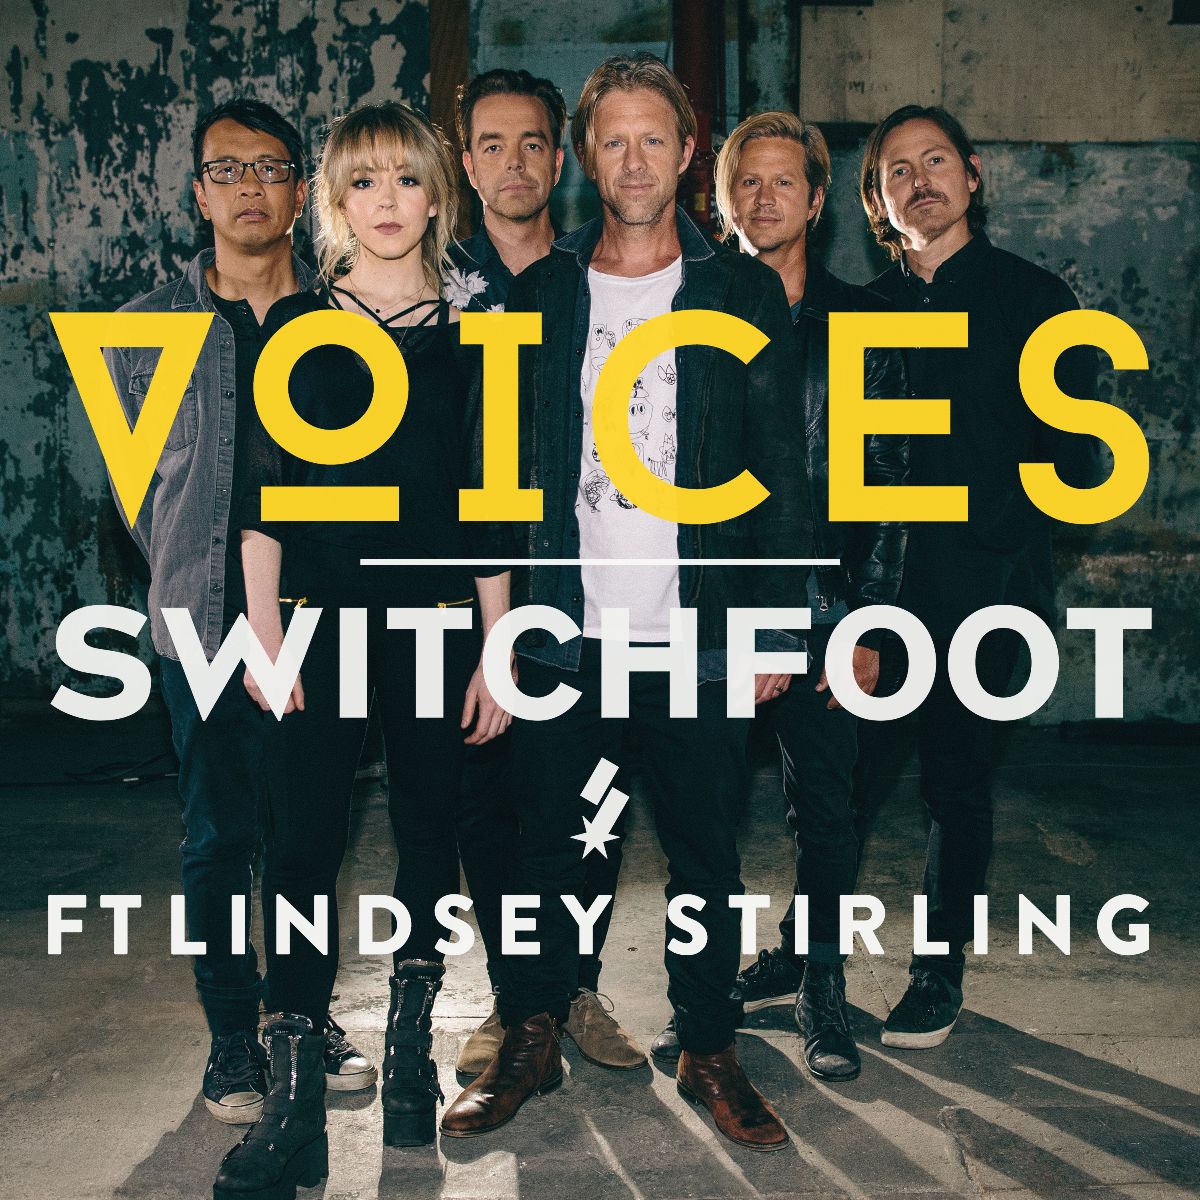 Switchfoot - Voices Ft Lindsey Stirling